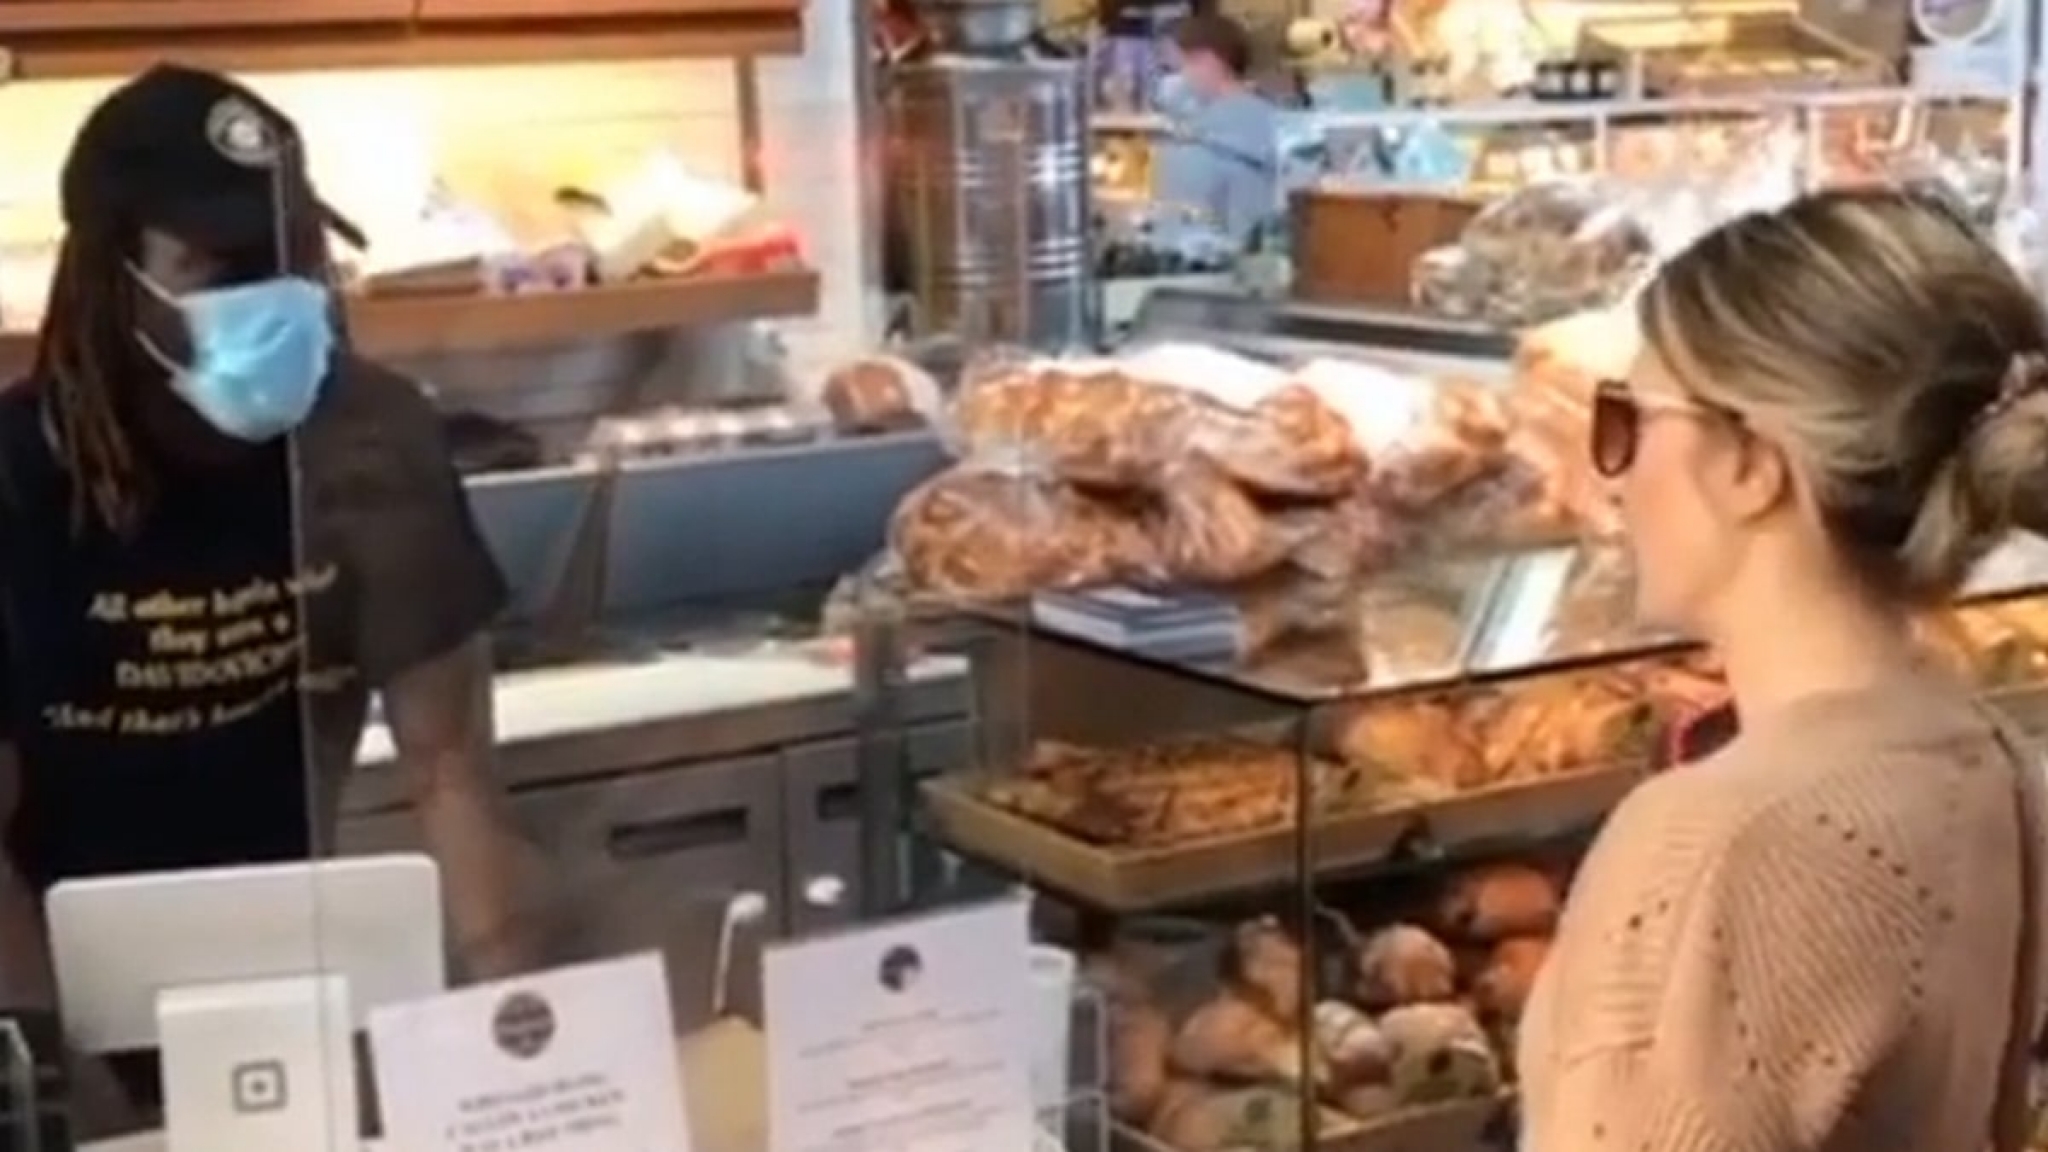 Woman Banned from Bakery After Calling Employee N-Word, Complaint Filed